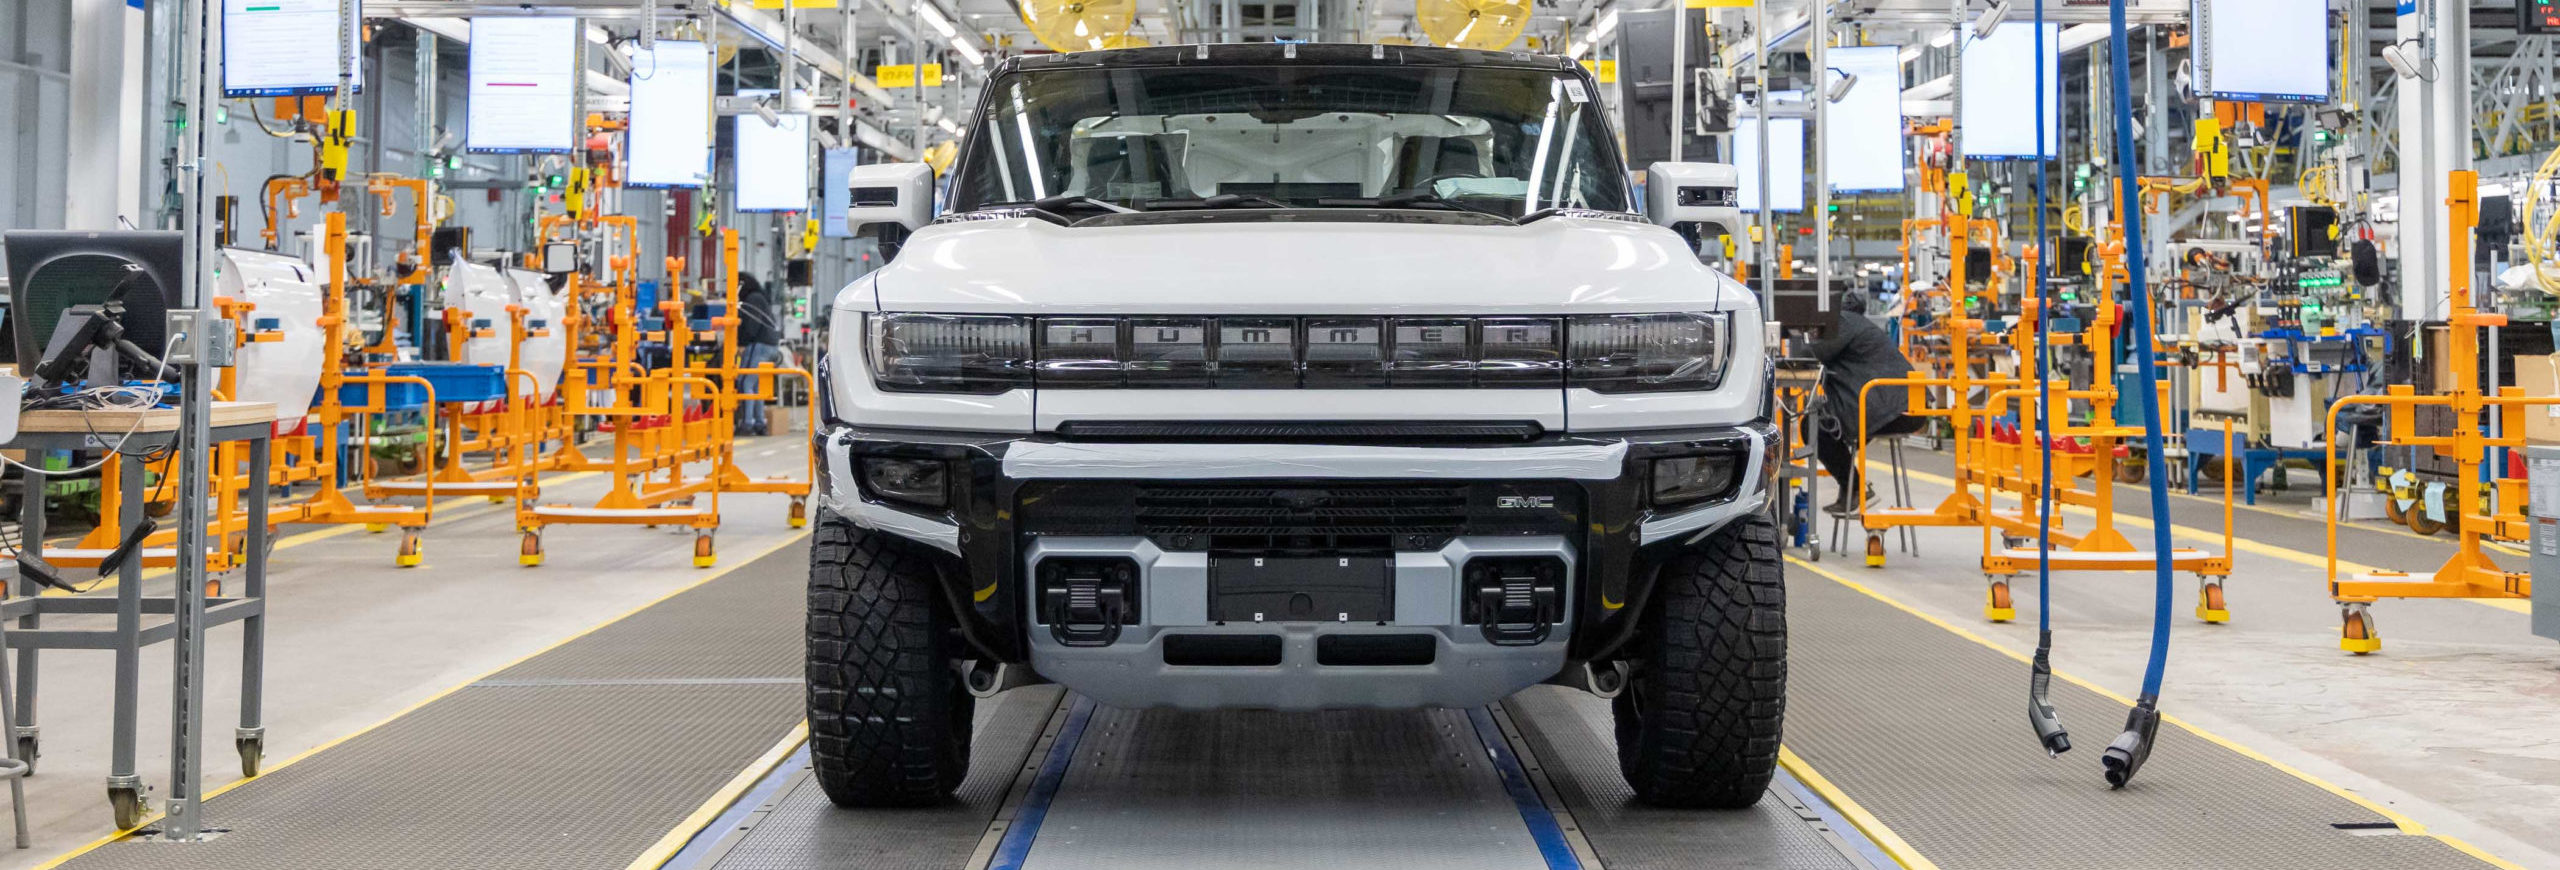 Pre-production of the 2022 GMC HUMMER EV